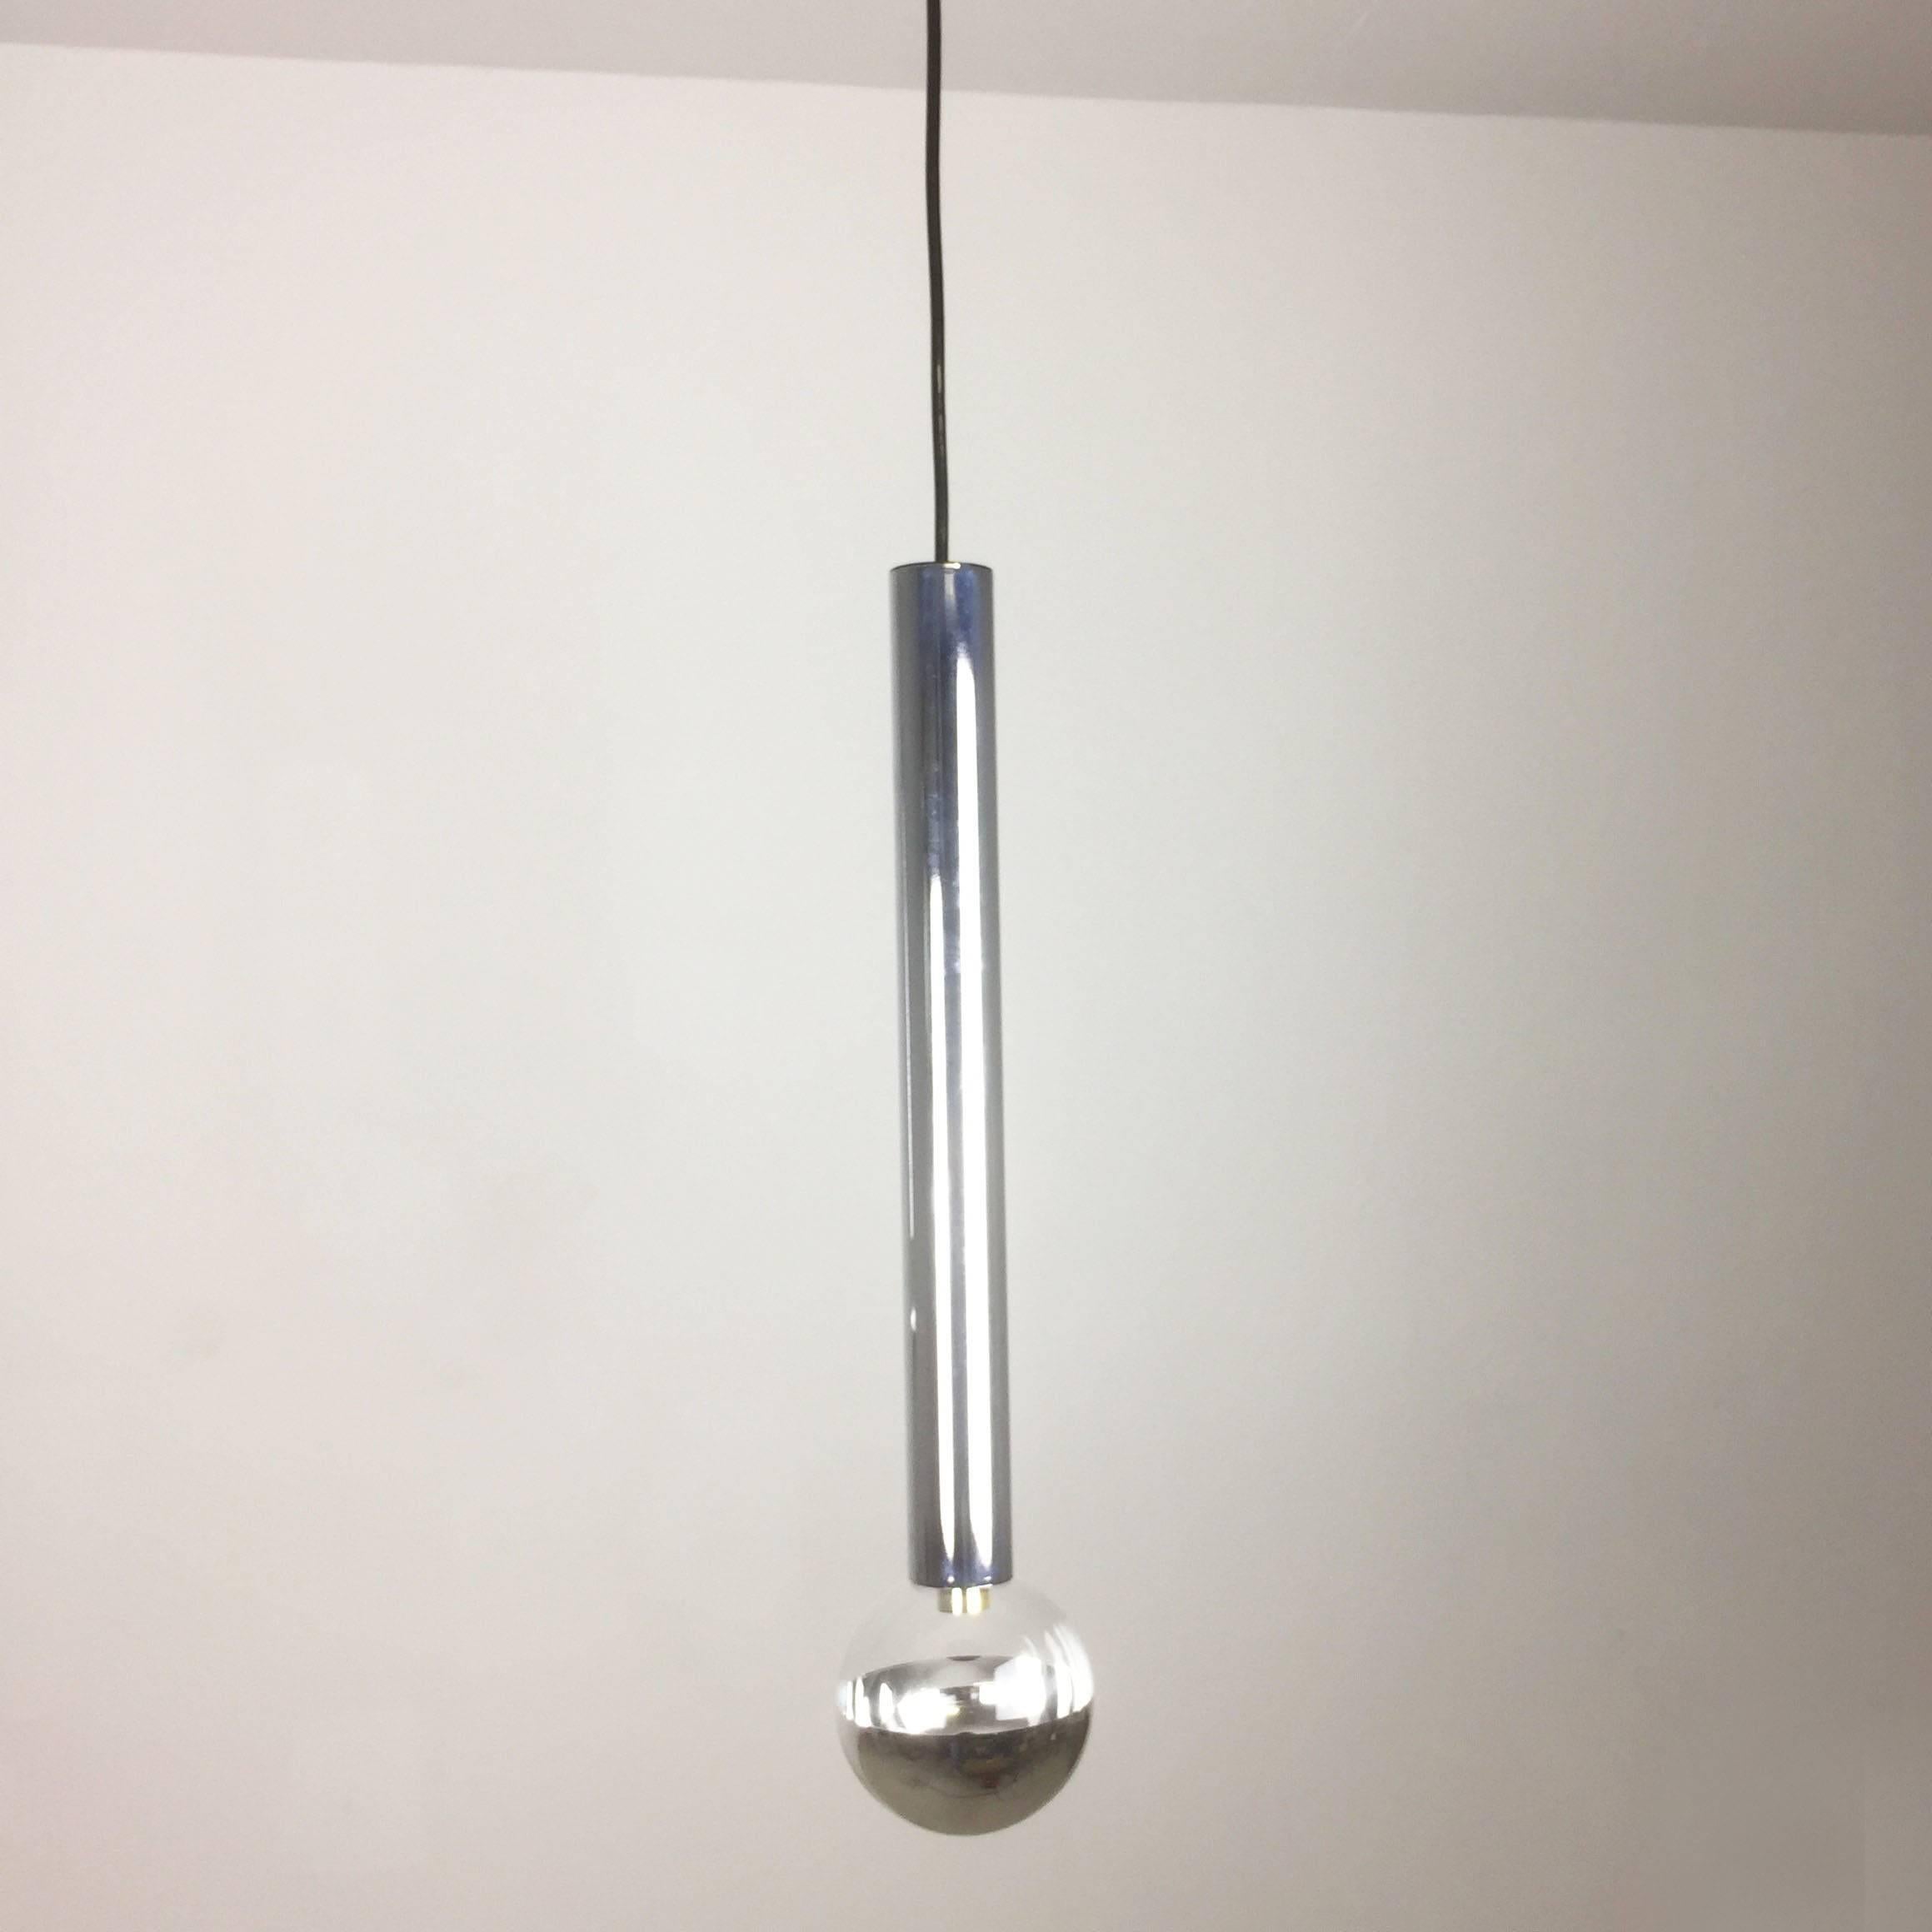 1970s Chrome hanging Lights Glass Bulb by Motoko Ishi for Staff Lights, Germany In Good Condition For Sale In Kirchlengern, DE